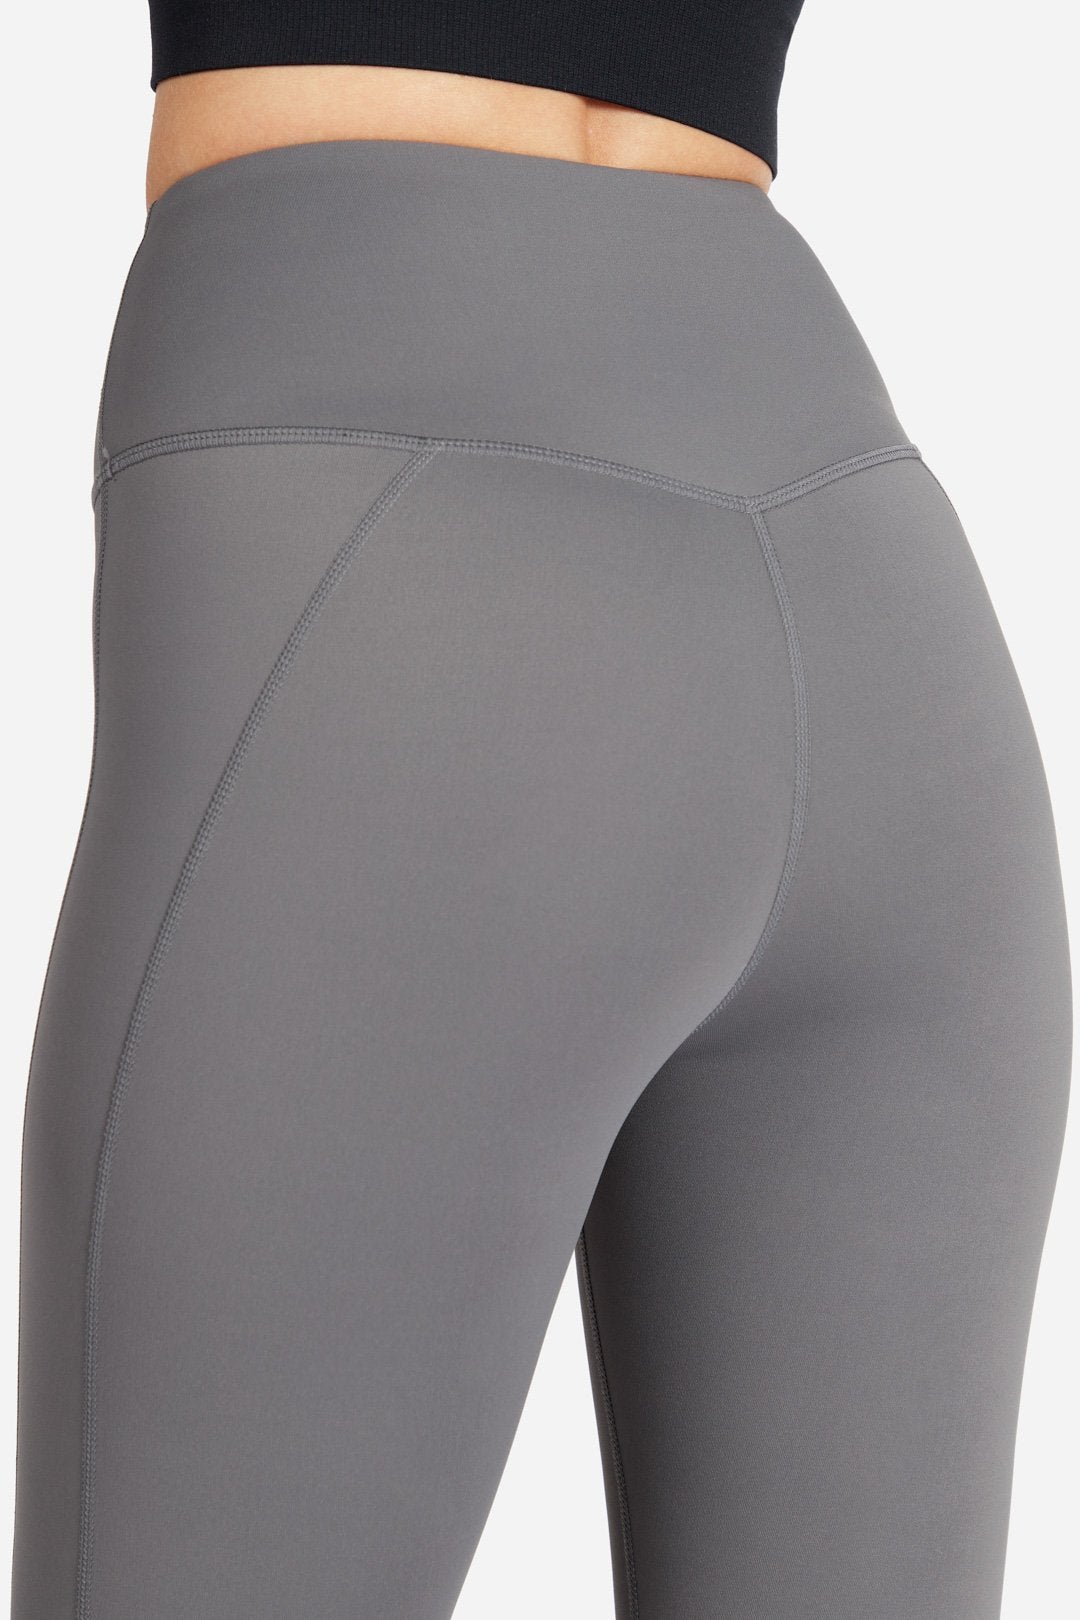 Grey Gym Tights - for dame - Famme - Leggings